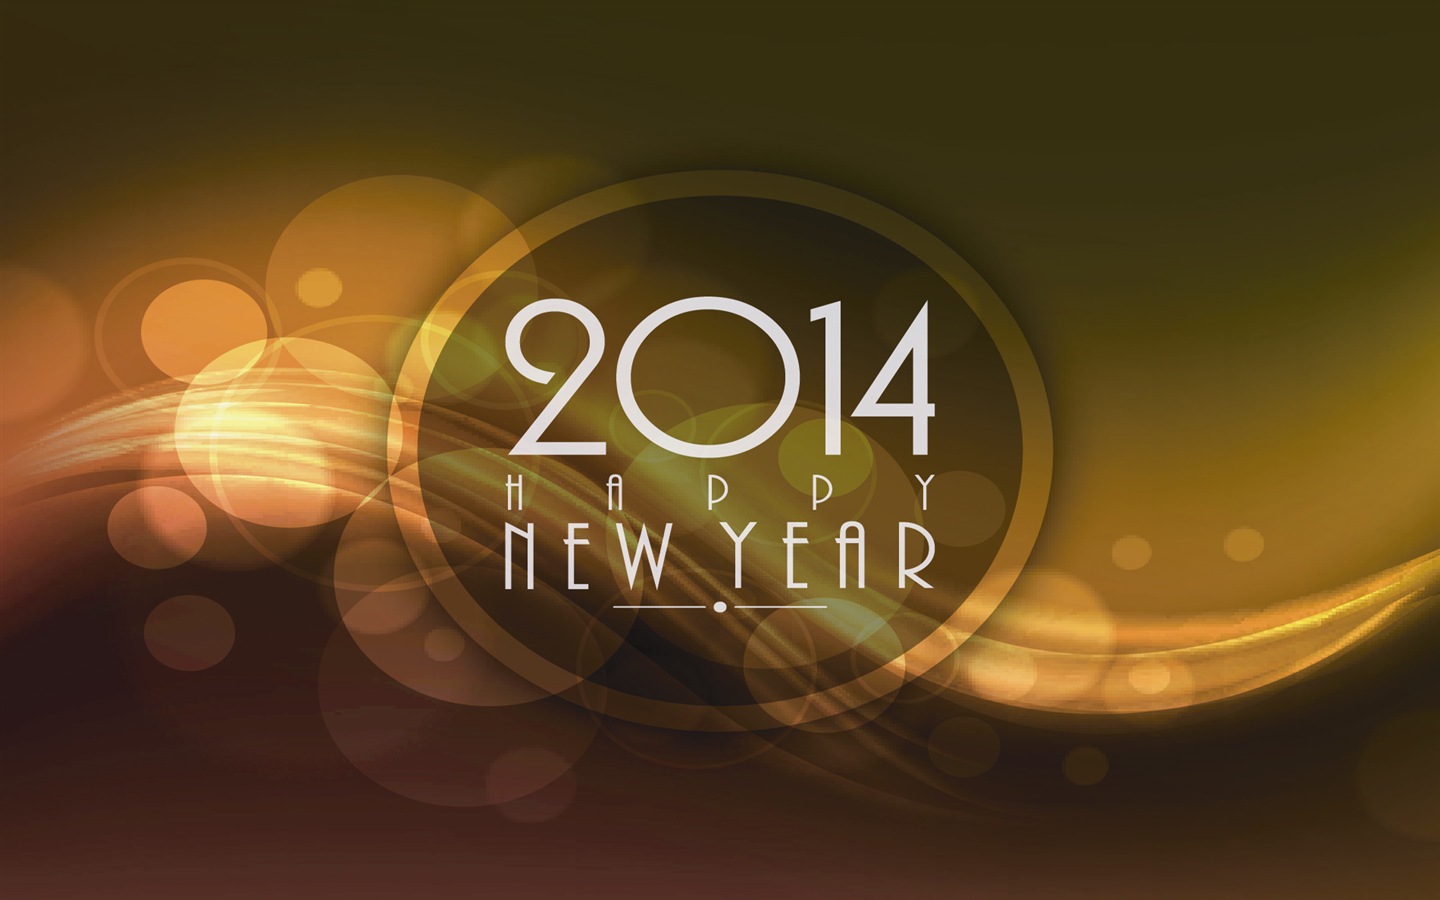 2014 New Year Theme HD Wallpapers (1) #4 - 1440x900